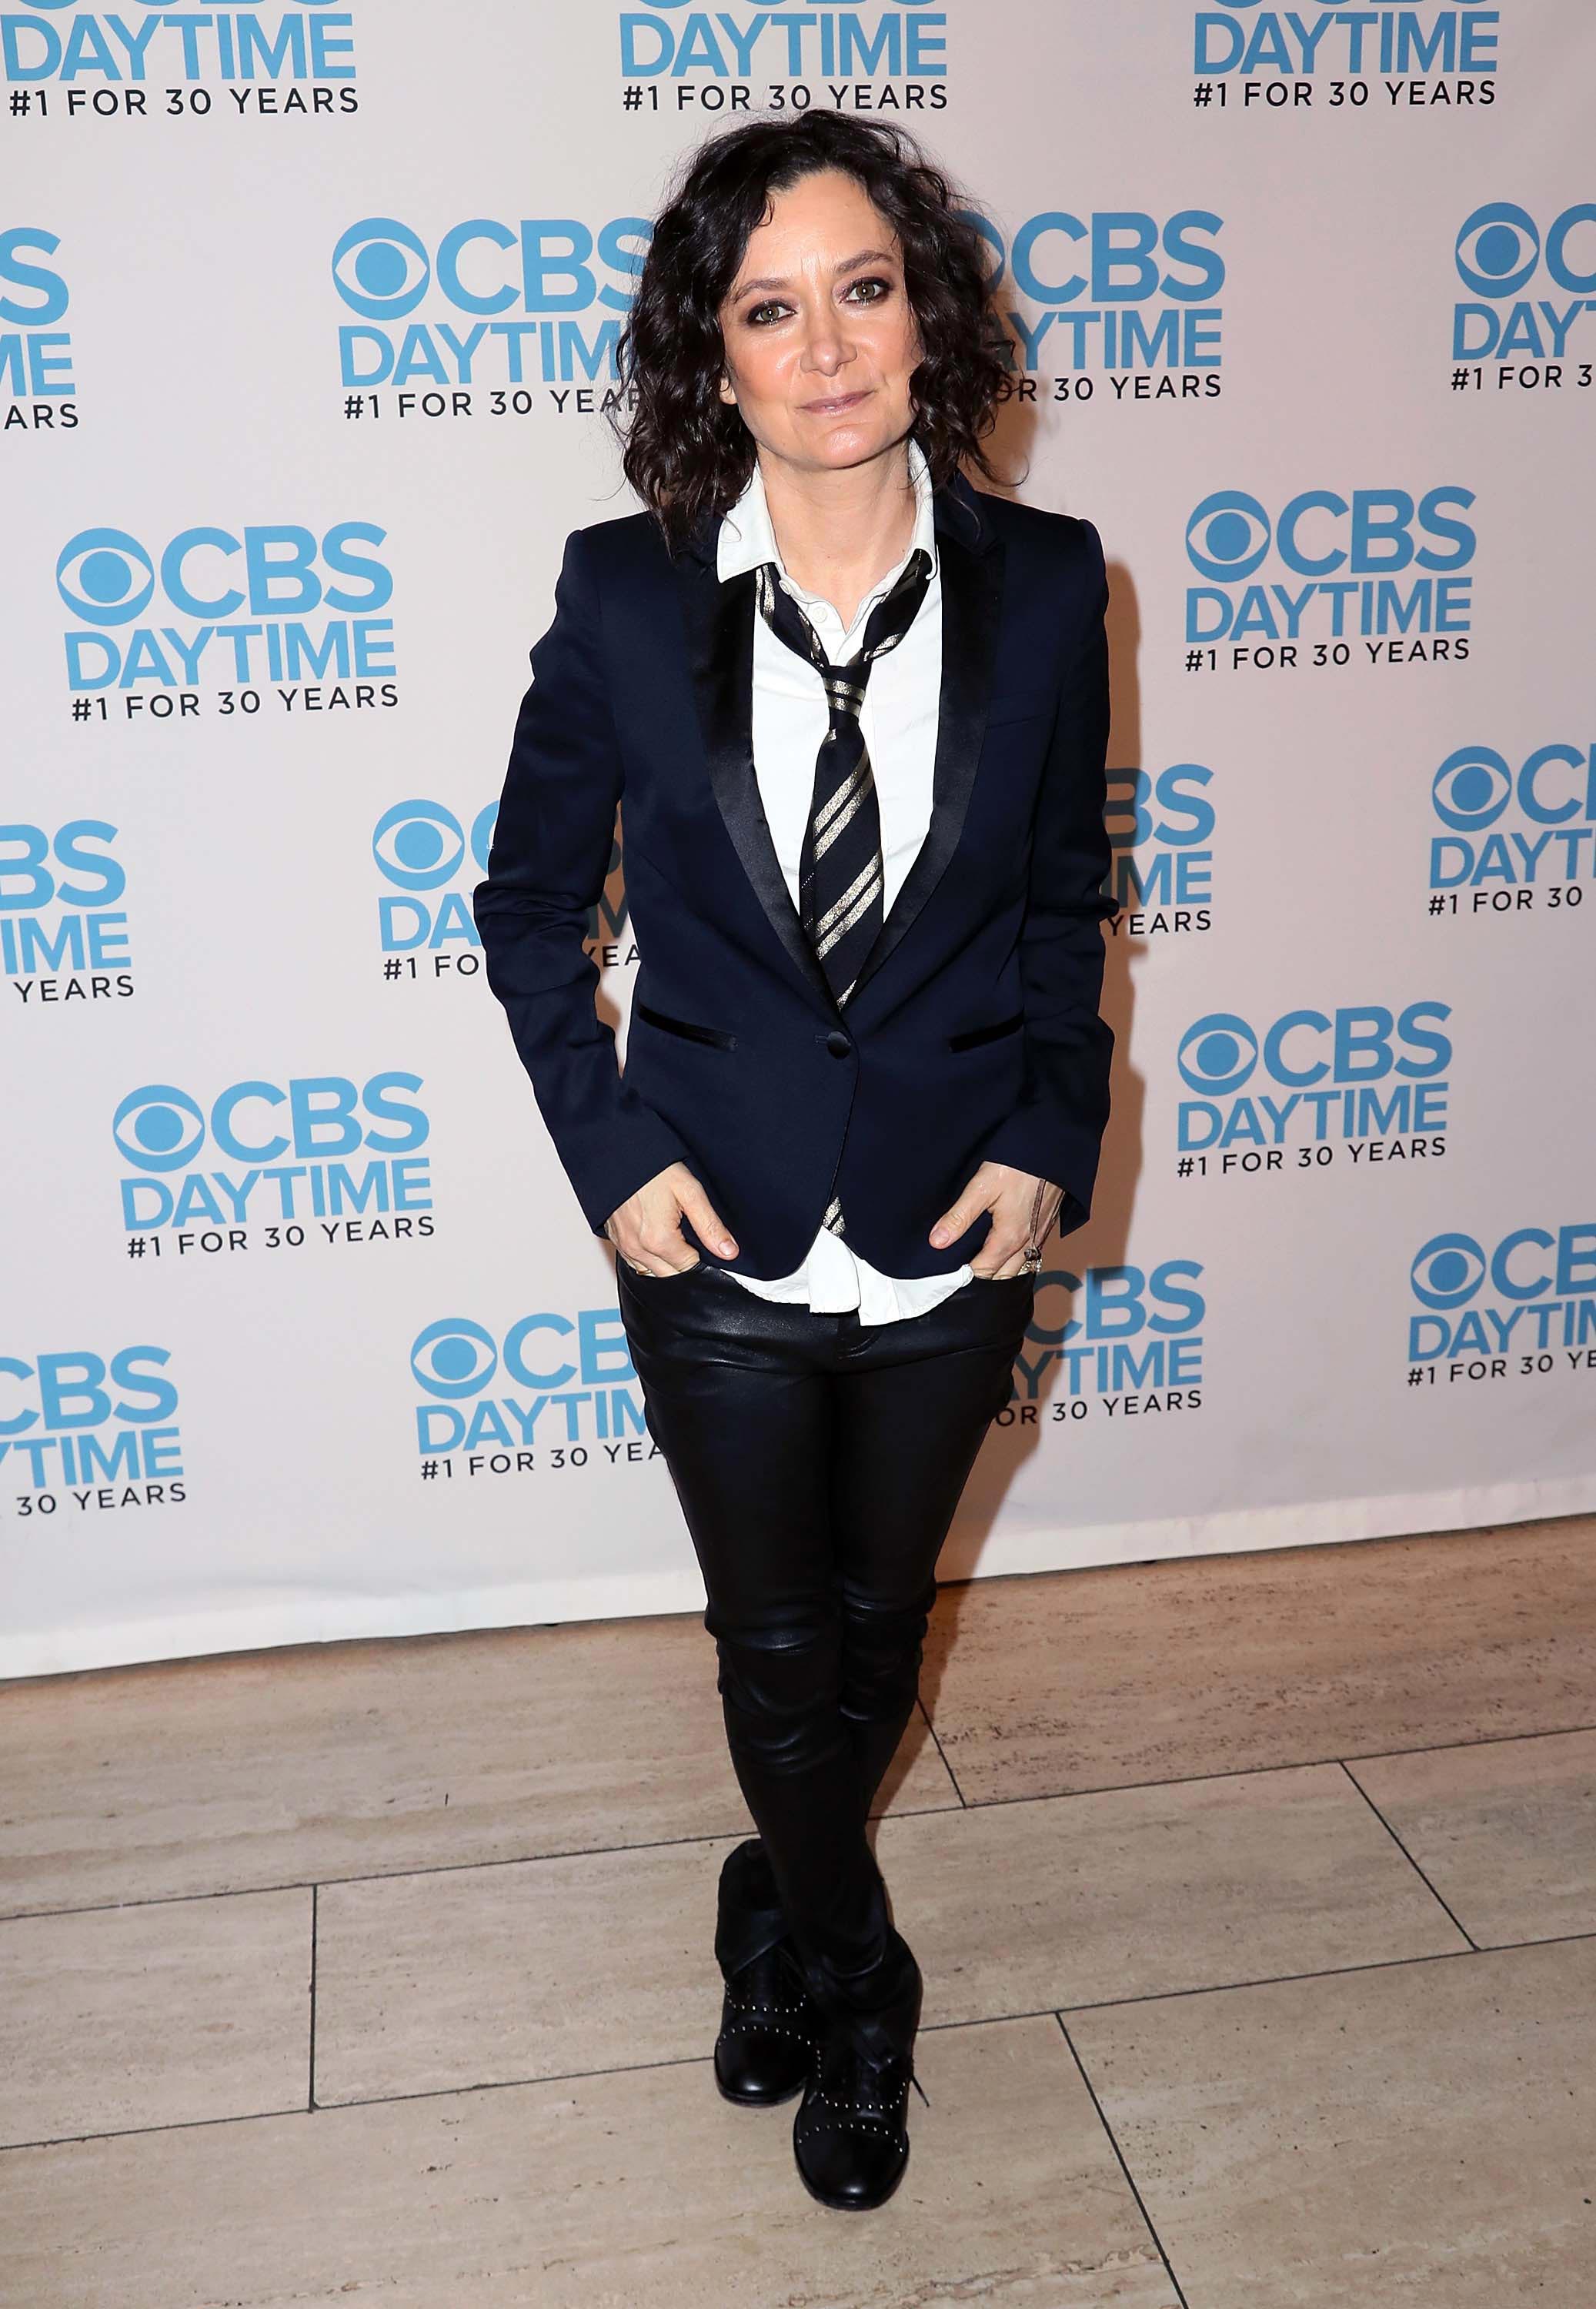 Sara Gilbert attends the panel for The Talk presented by CBS Daytime